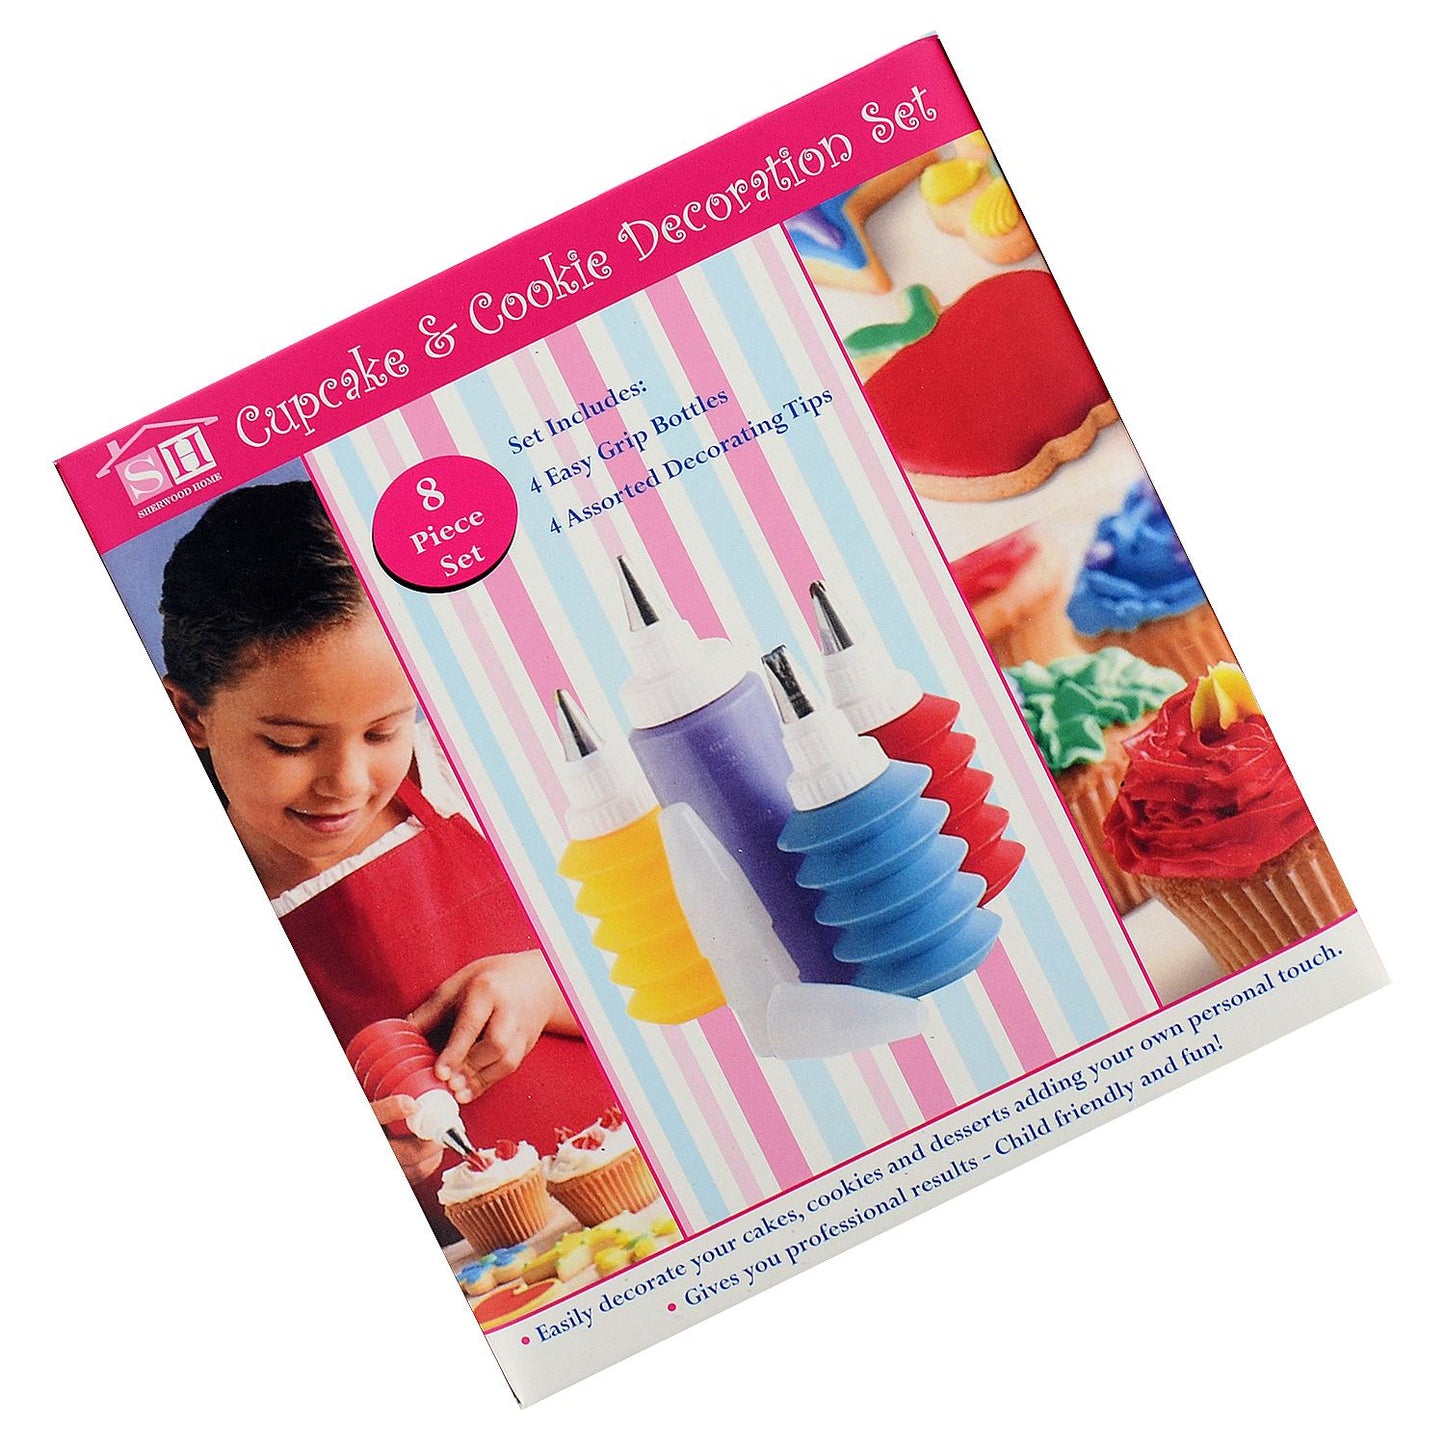 Baking Decoration Kit For Cupcakes And Cookies - Icing And Frosting Tools 8Pc